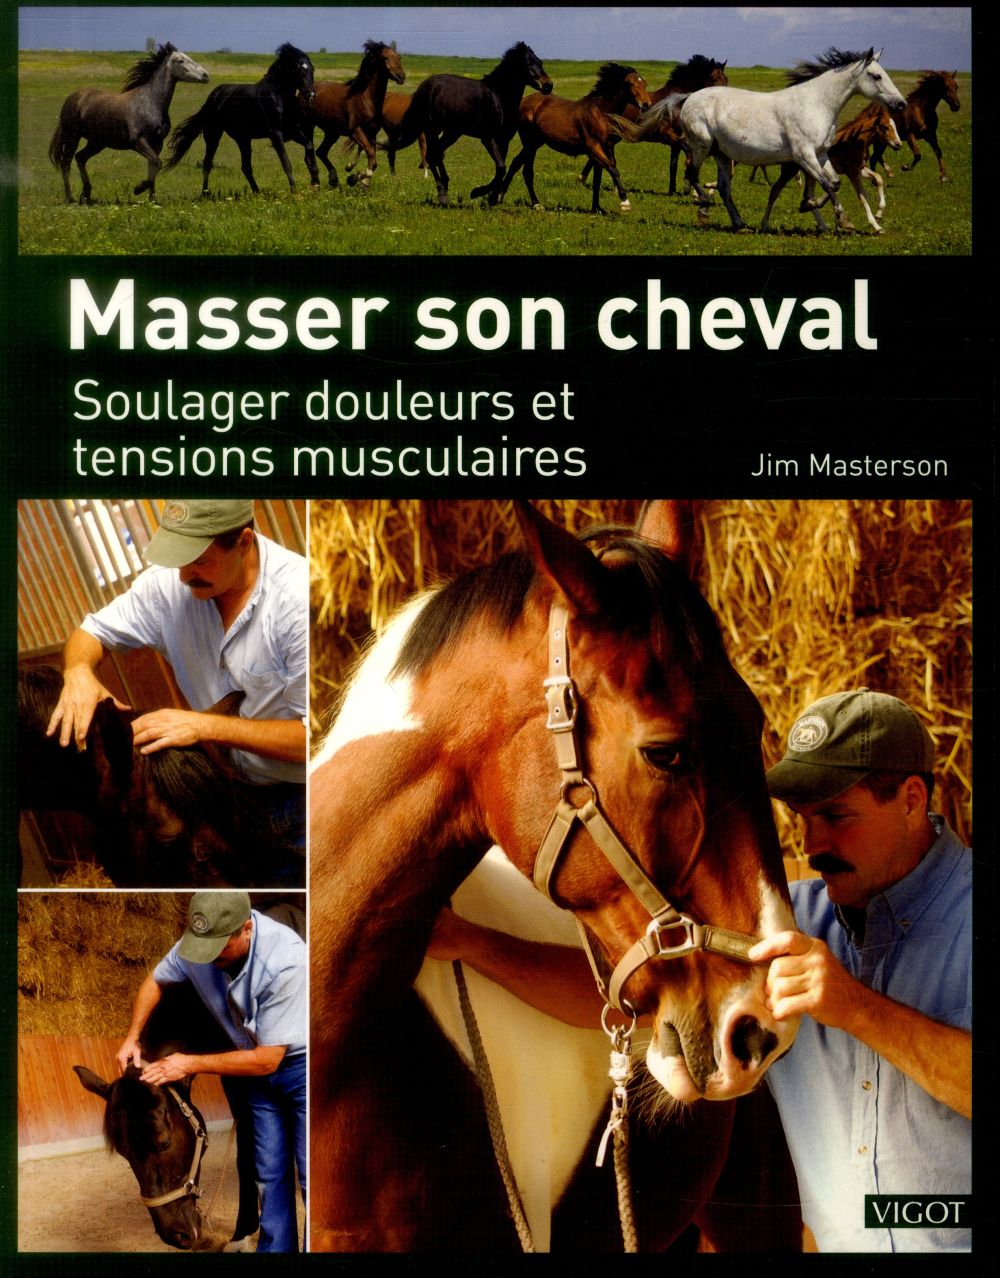 MASSER SON CHEVAL - SOULAGER DOULEURS ET TENSIONS MUSCULAIRES